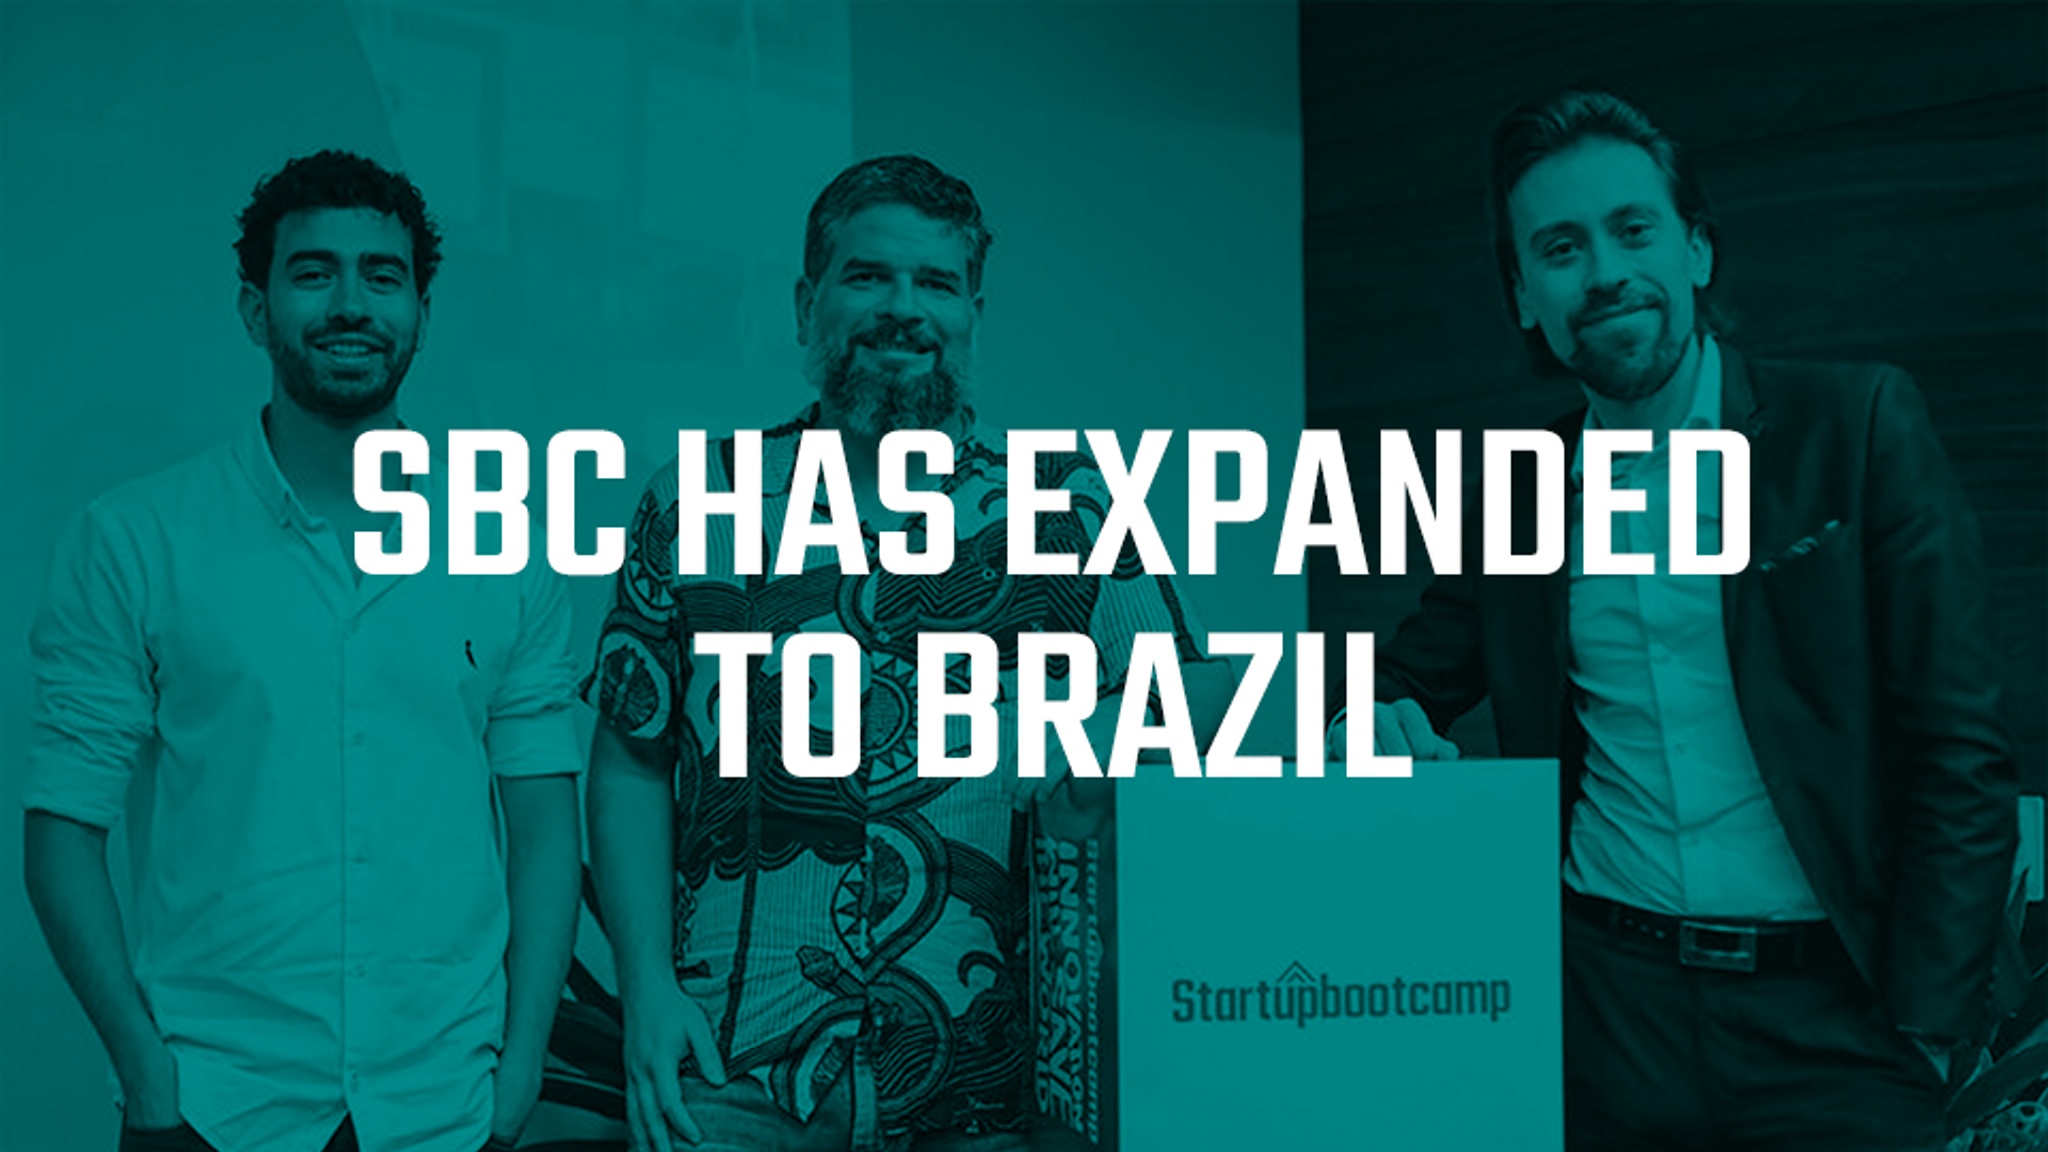 Startupbootcamp has expanded to South America: A New Era for the Entrepreneurial Ecosystem